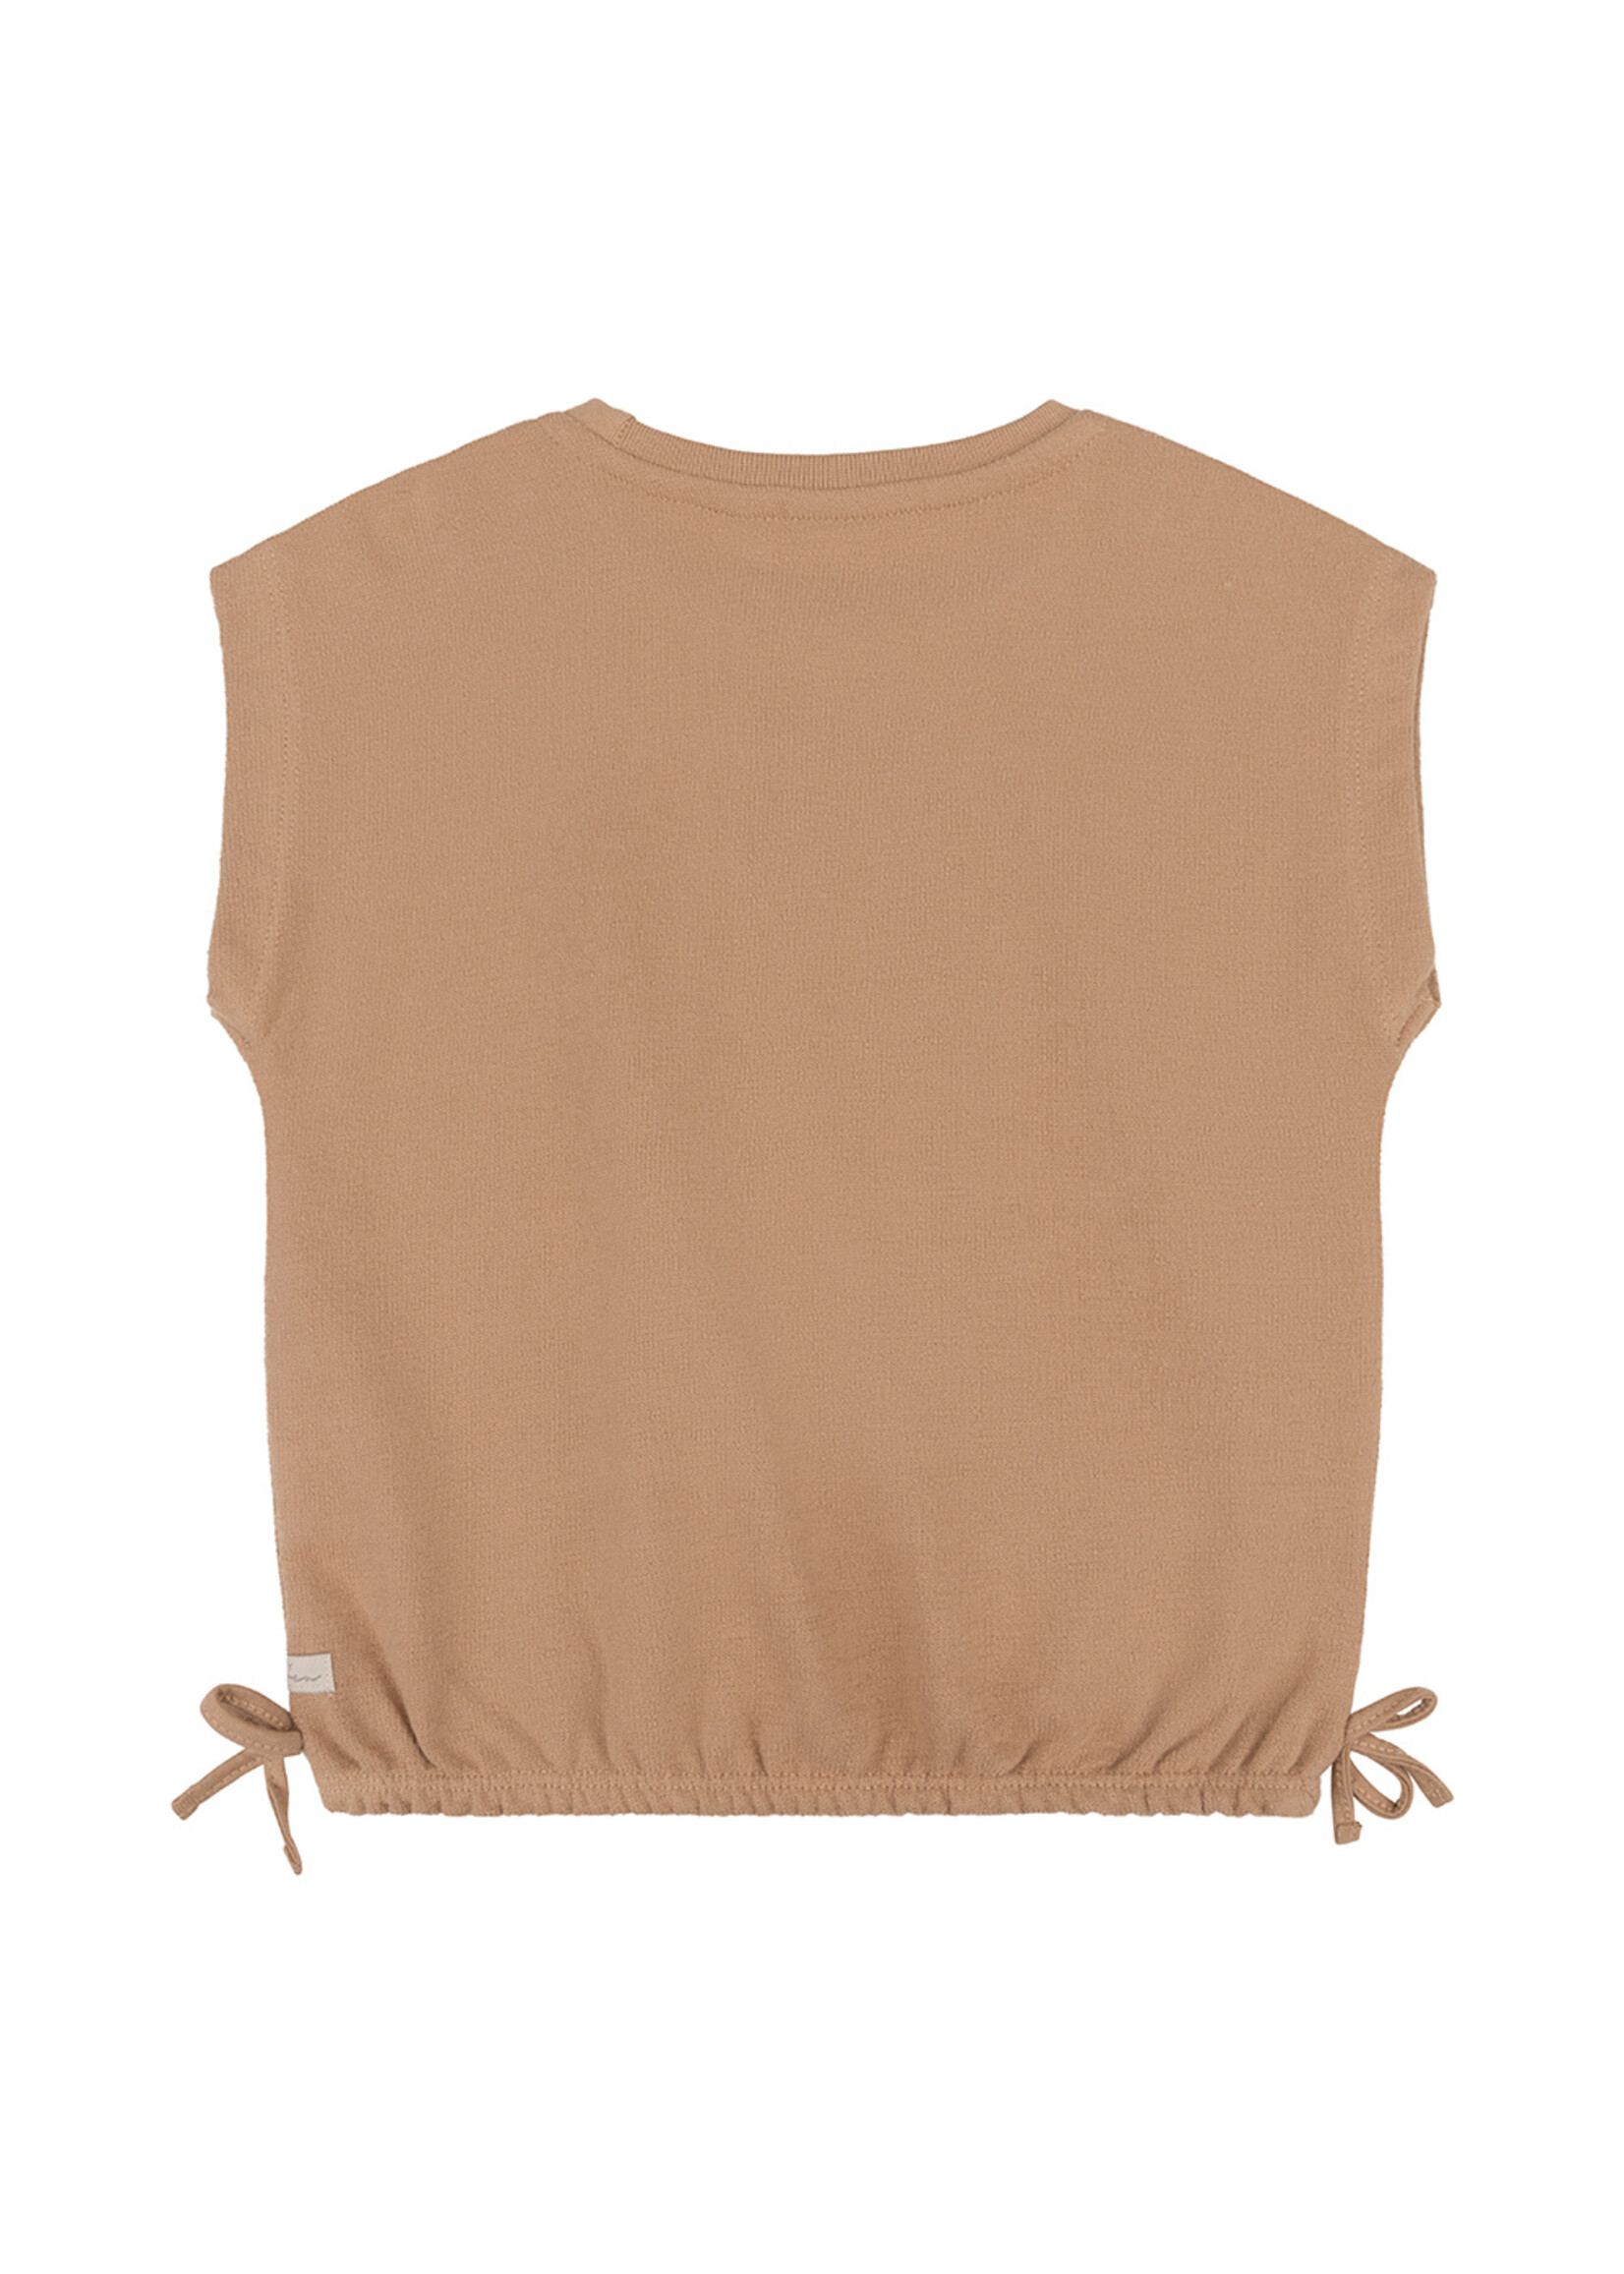 Daily7 Organic T-shirt Pour Toujours Camel sand